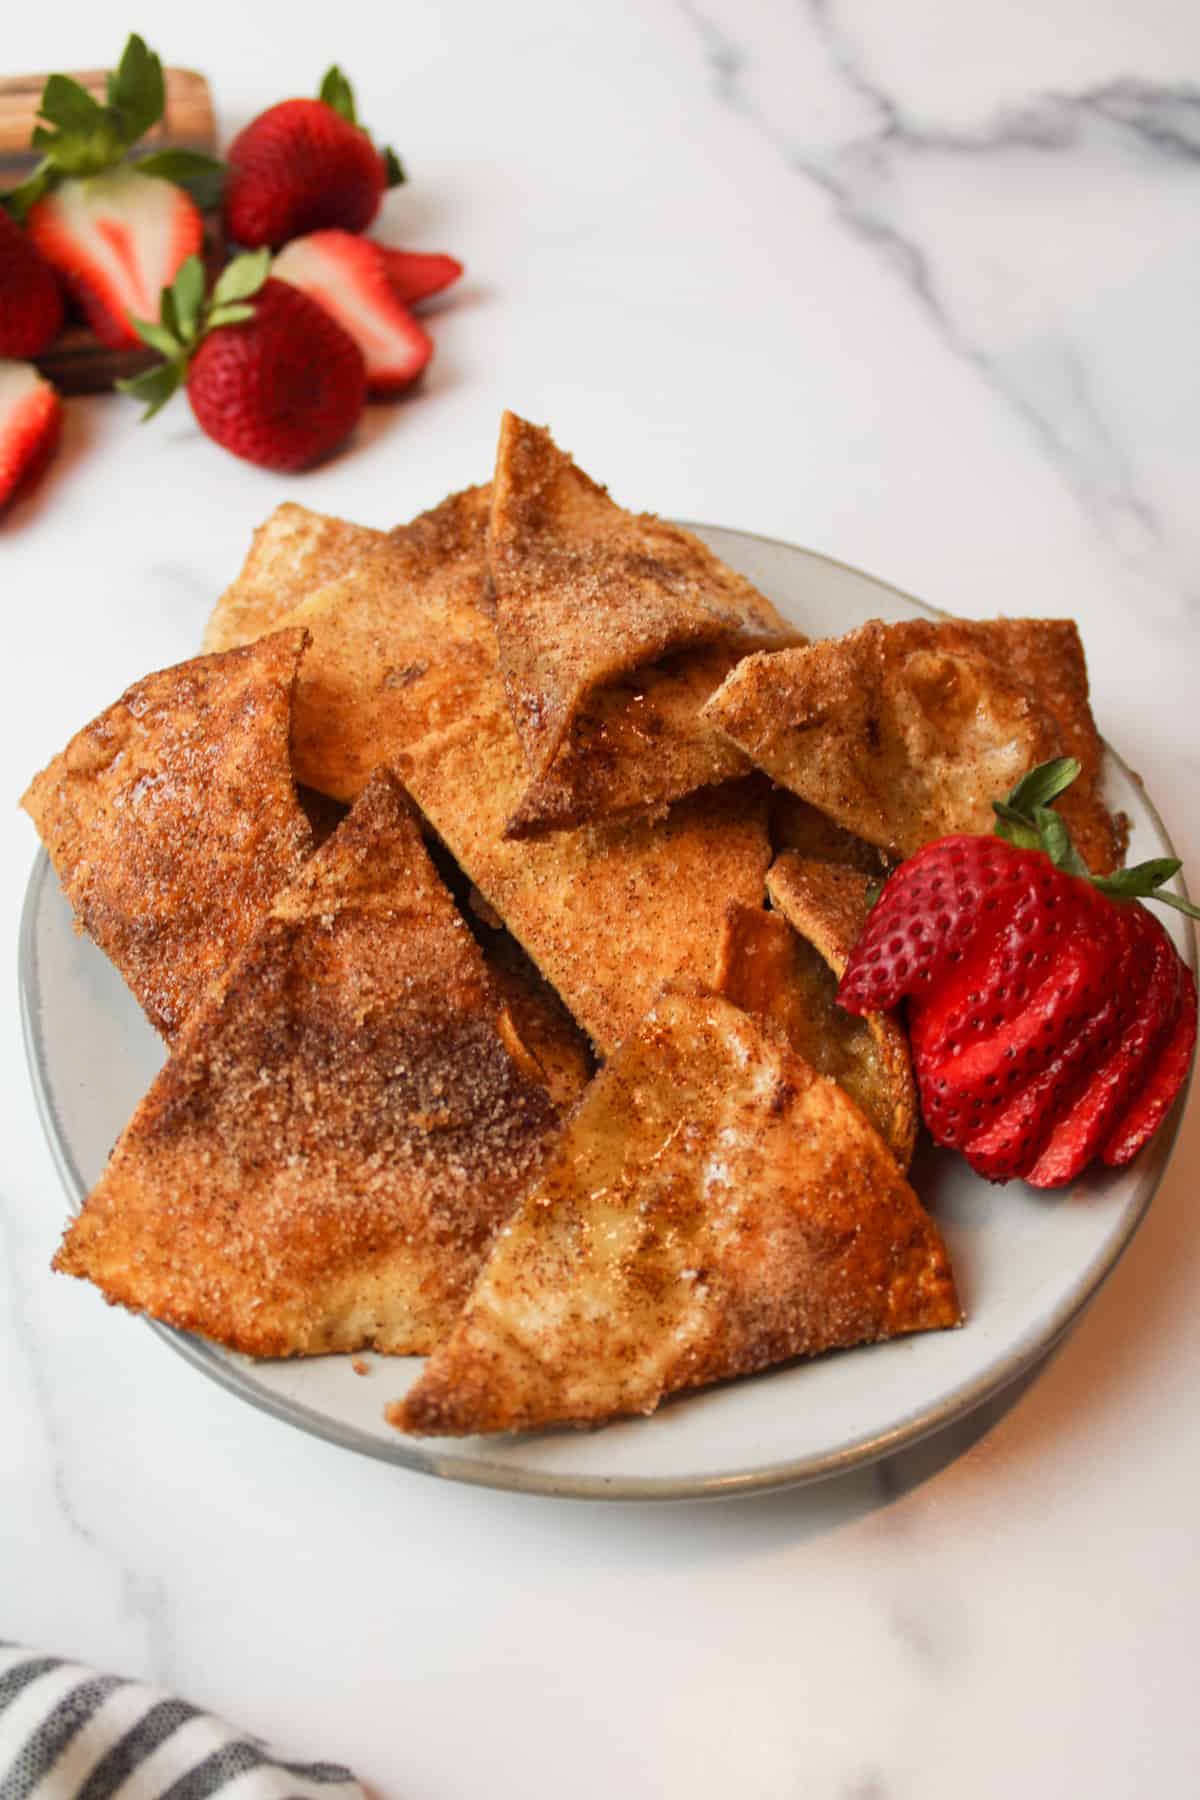 fresh strawberries and cinnamon sugar tortilla chips on a plate.